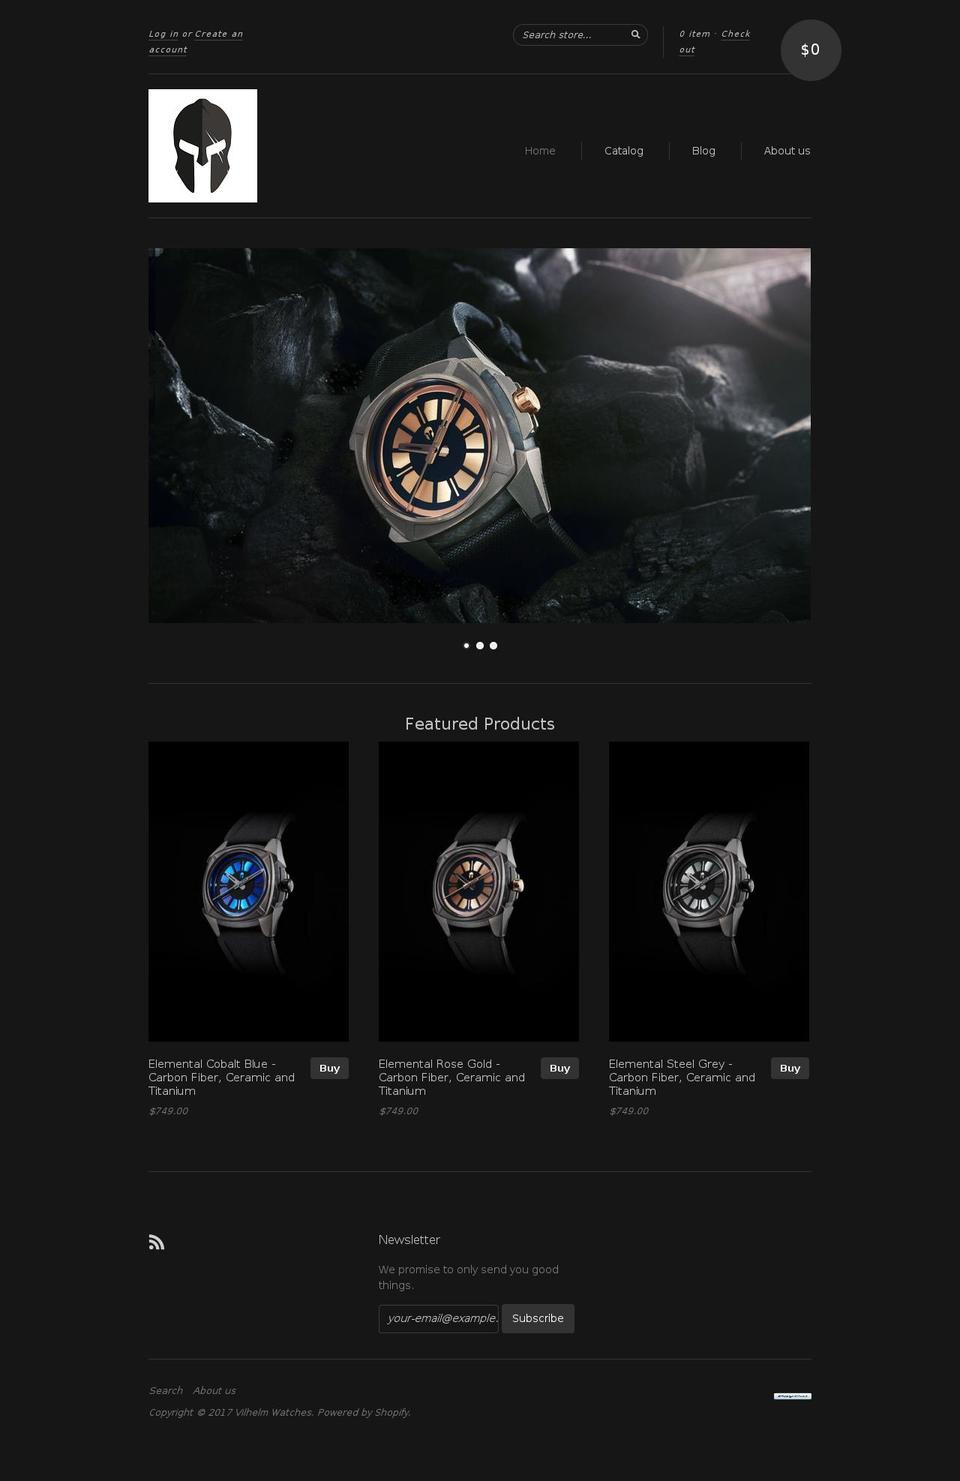 new standard Shopify theme site example vilhelmwatches.com